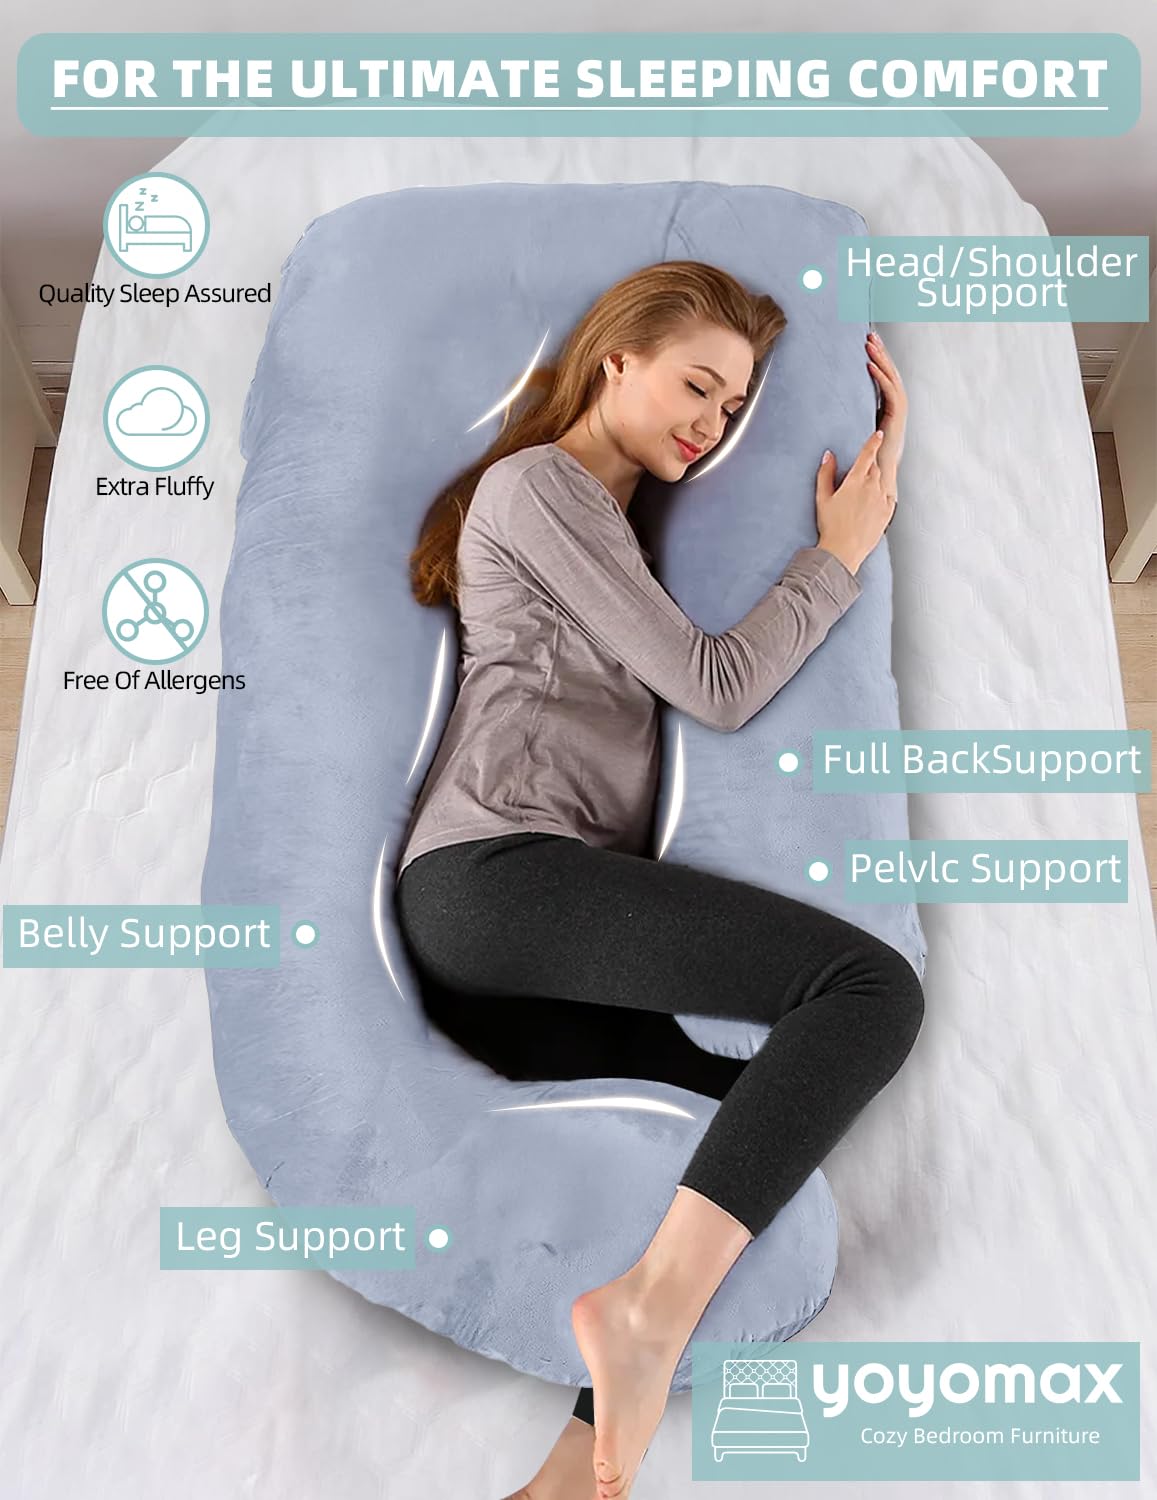 yoyomax Pregnancy Pillows, U Shaped Full Body Maternity Pillow Memory Foam Pregnancy Pillow with Removable Cover, 57 Inch Pregnancy Pillows for Sleeping (Grey)